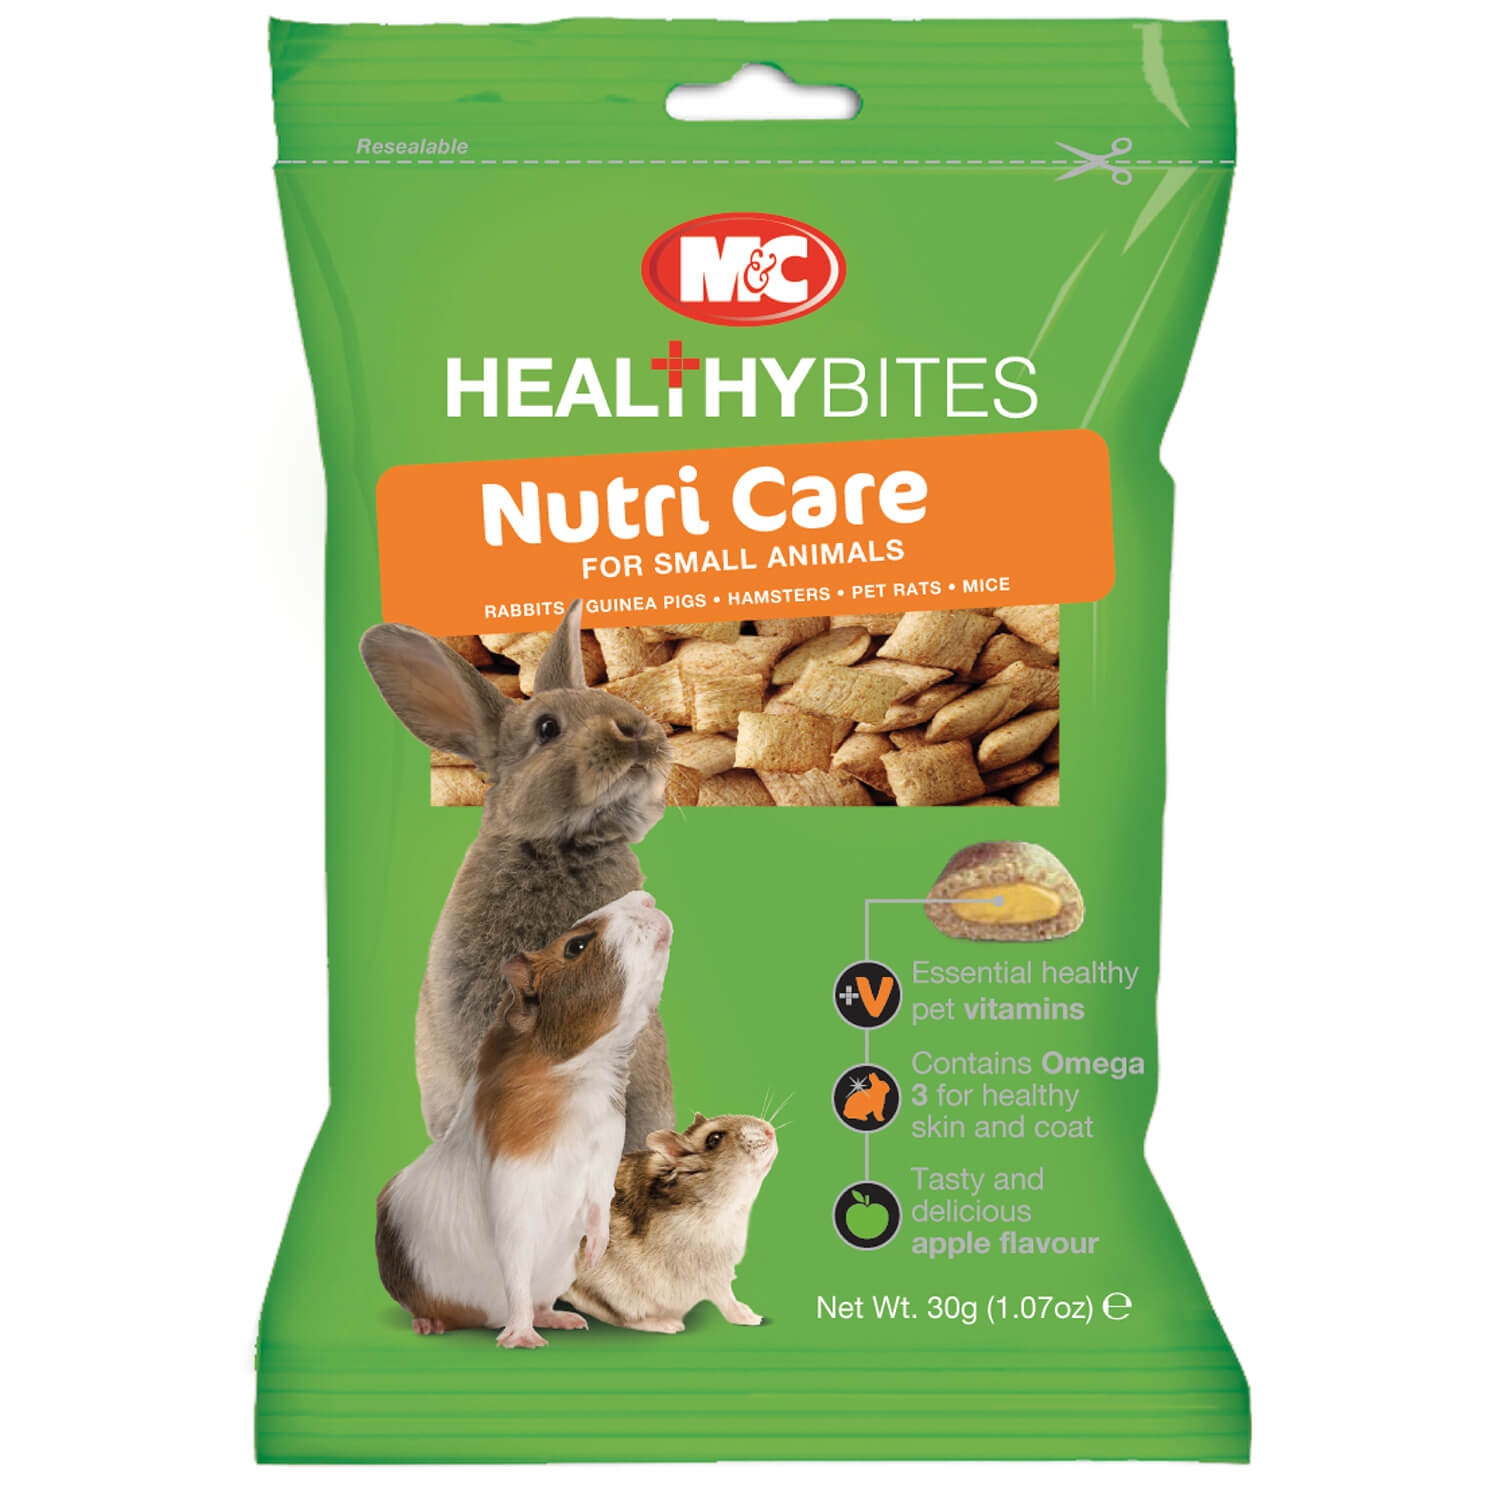 HEALTHY BITES NUTRI CARE FOR SMALL ANIMALS  30g